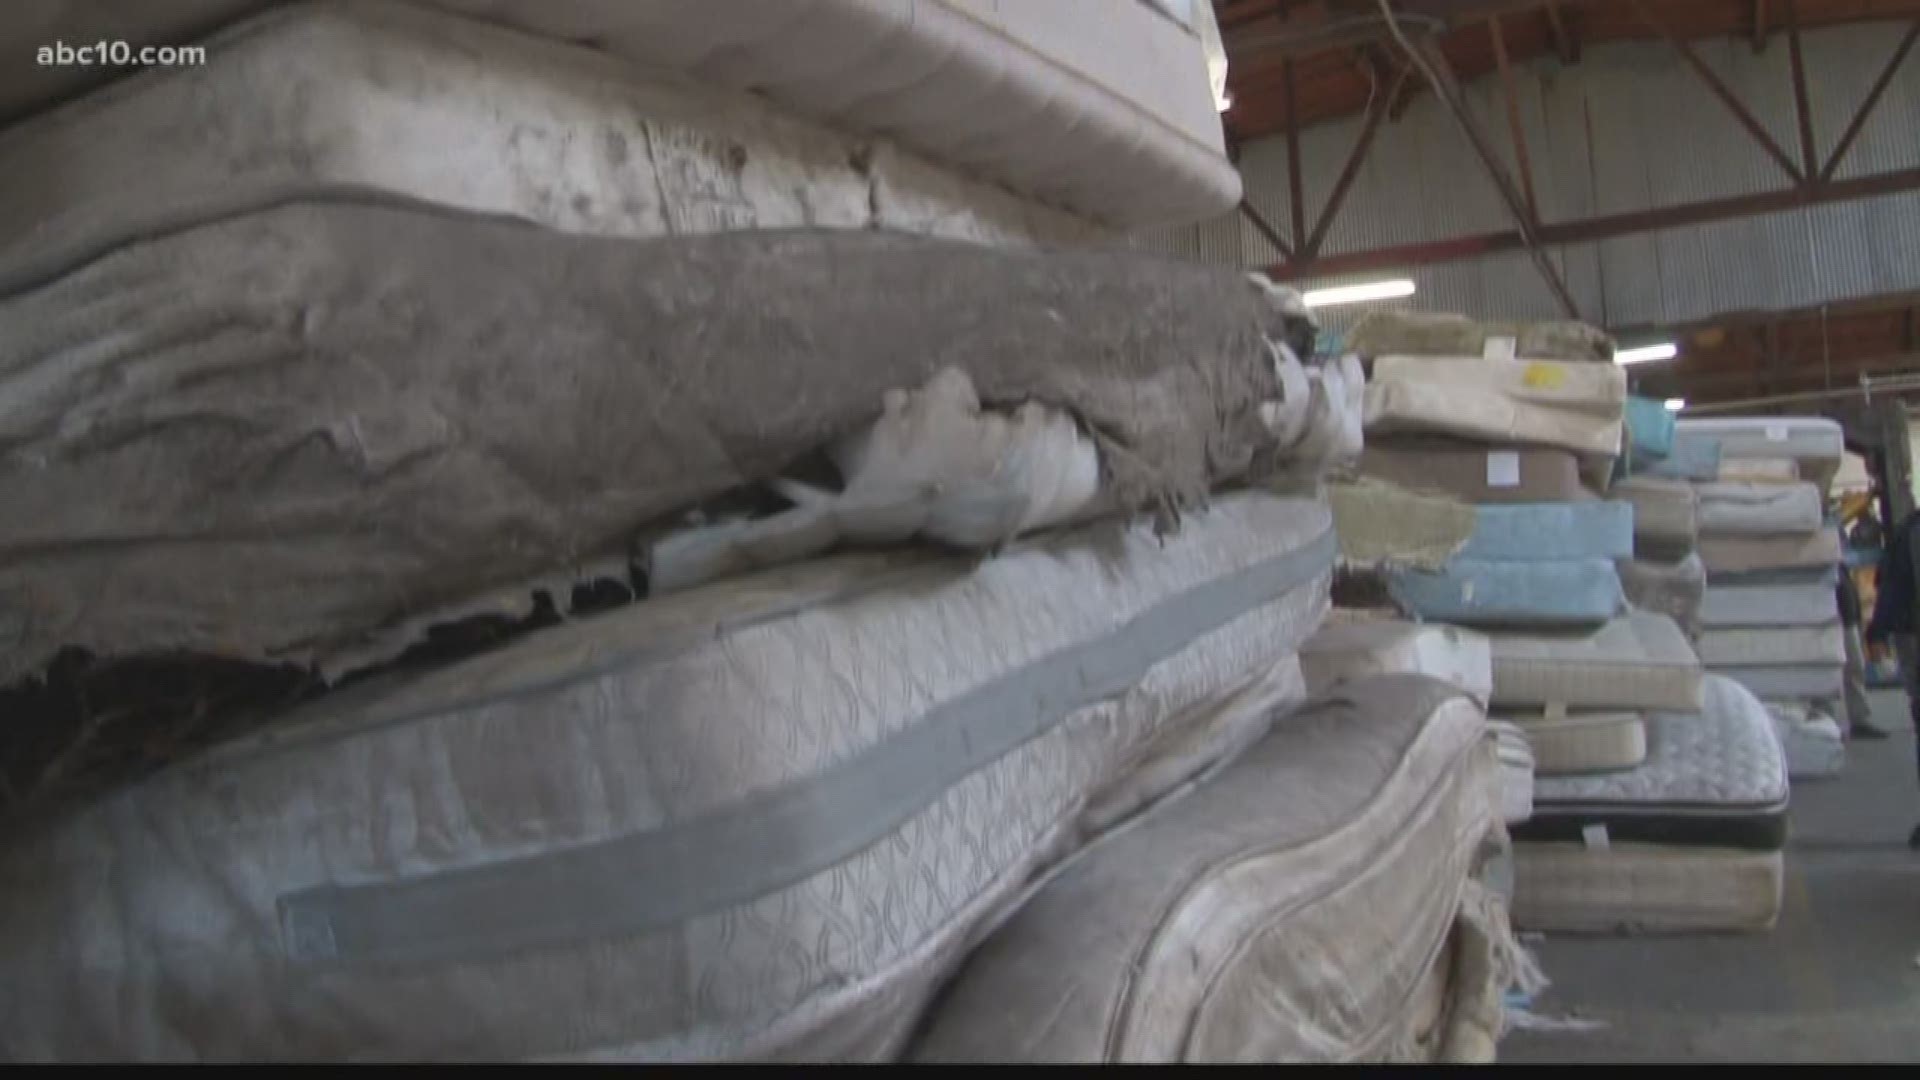 There have been 2,000 mattresses have been collected on Stockton streets alone. (April 19, 2018)